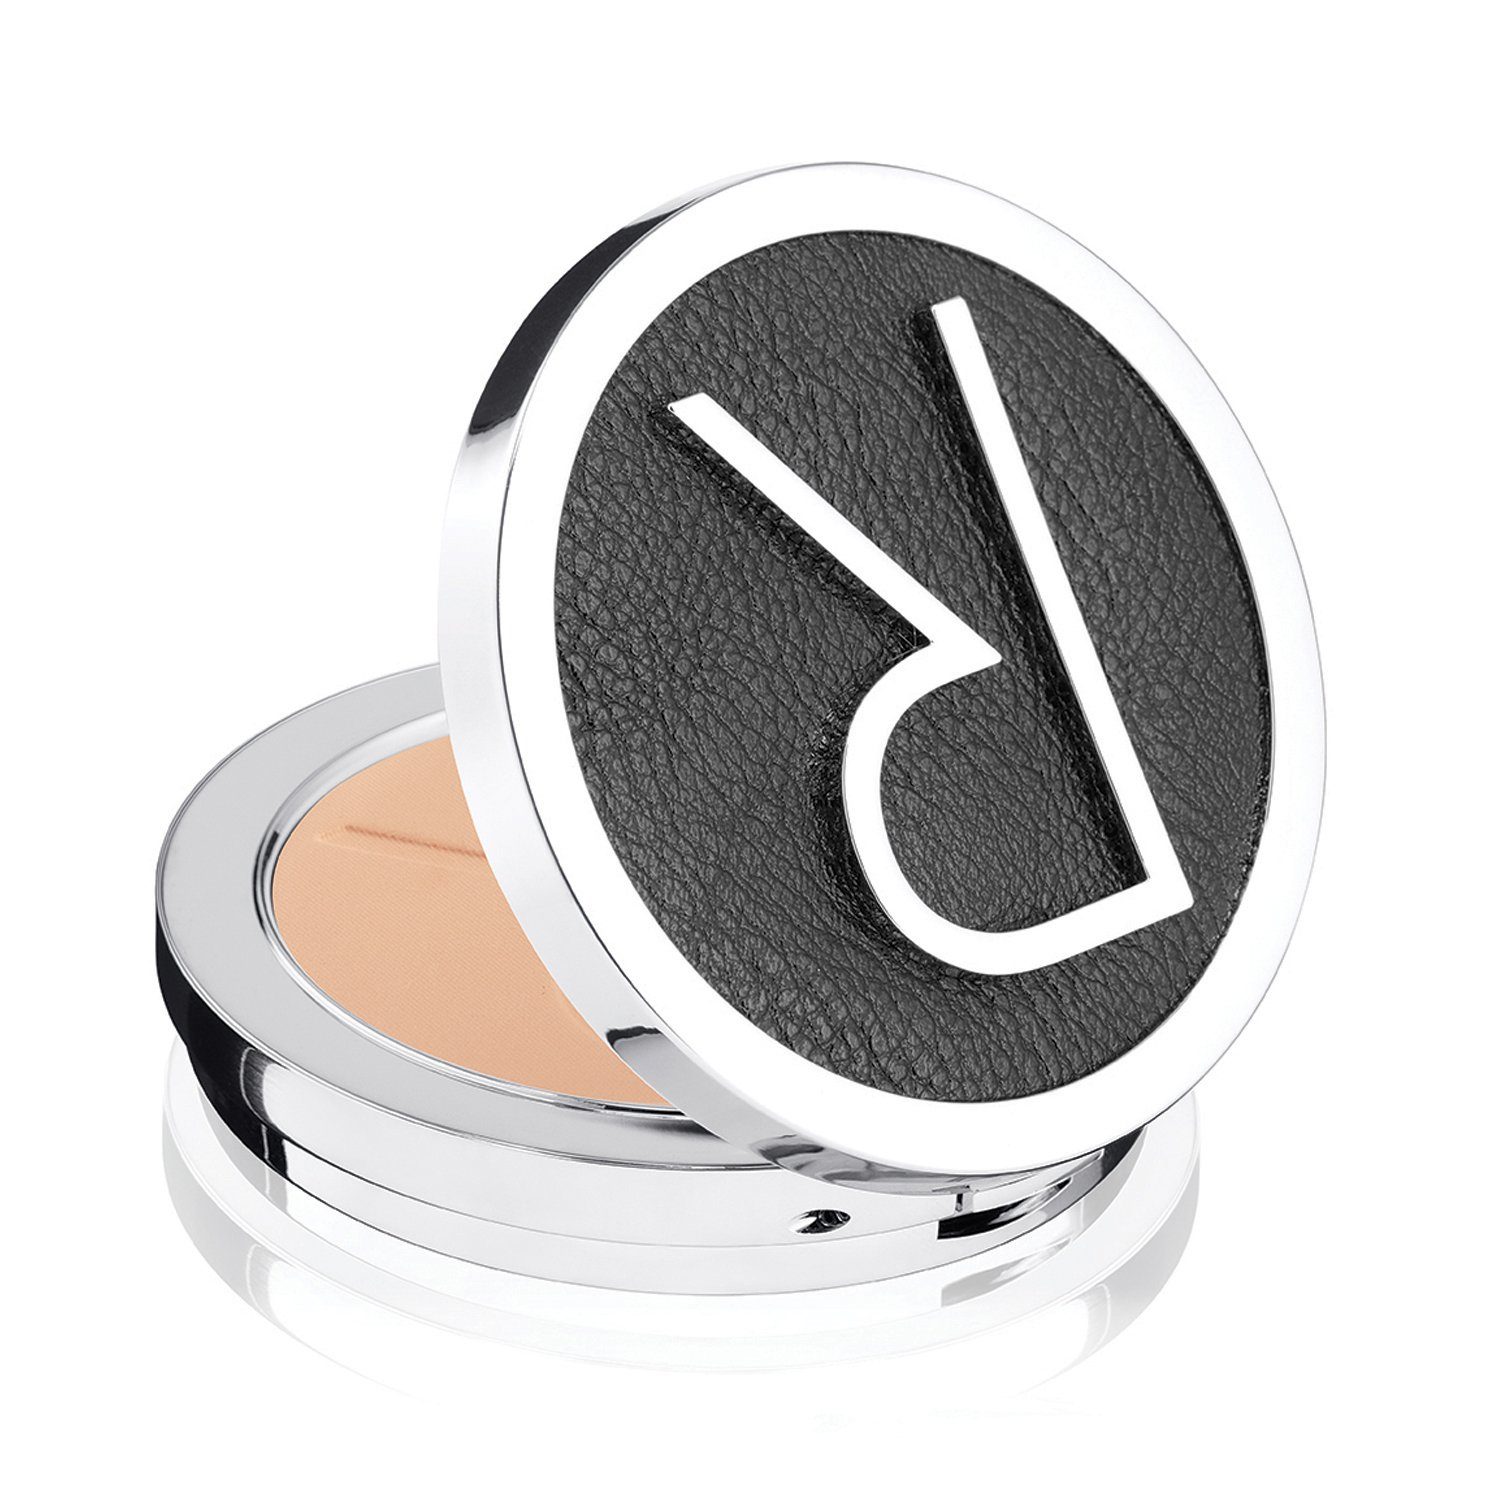 Rodial Glass Pressed Puder Puder Rodial Powder